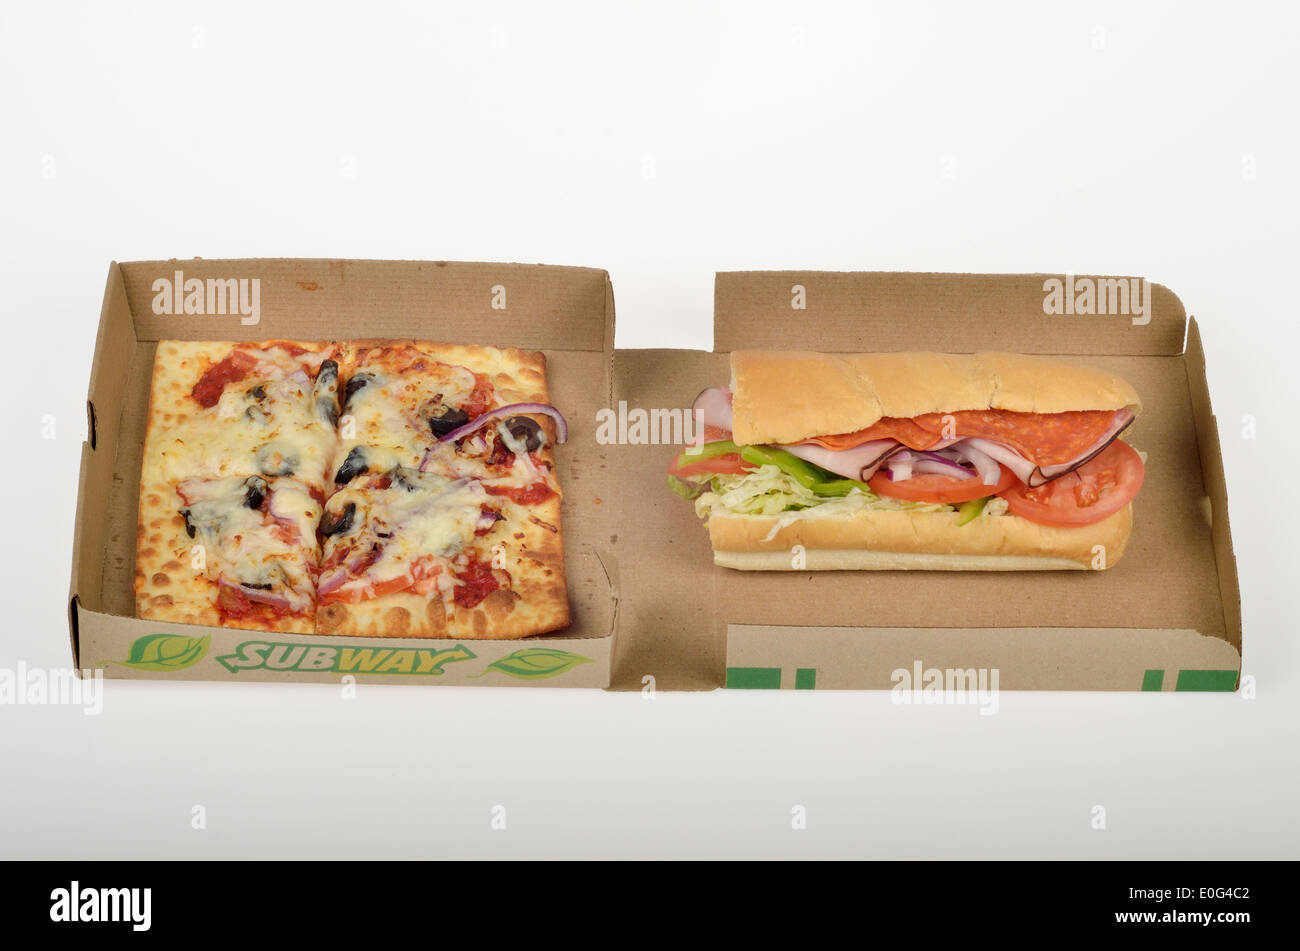 Subway Flatizza Veggie Vegetable pizza square slice & Italian BMT Sub in box packaging on white background cutout USA Stock Photo